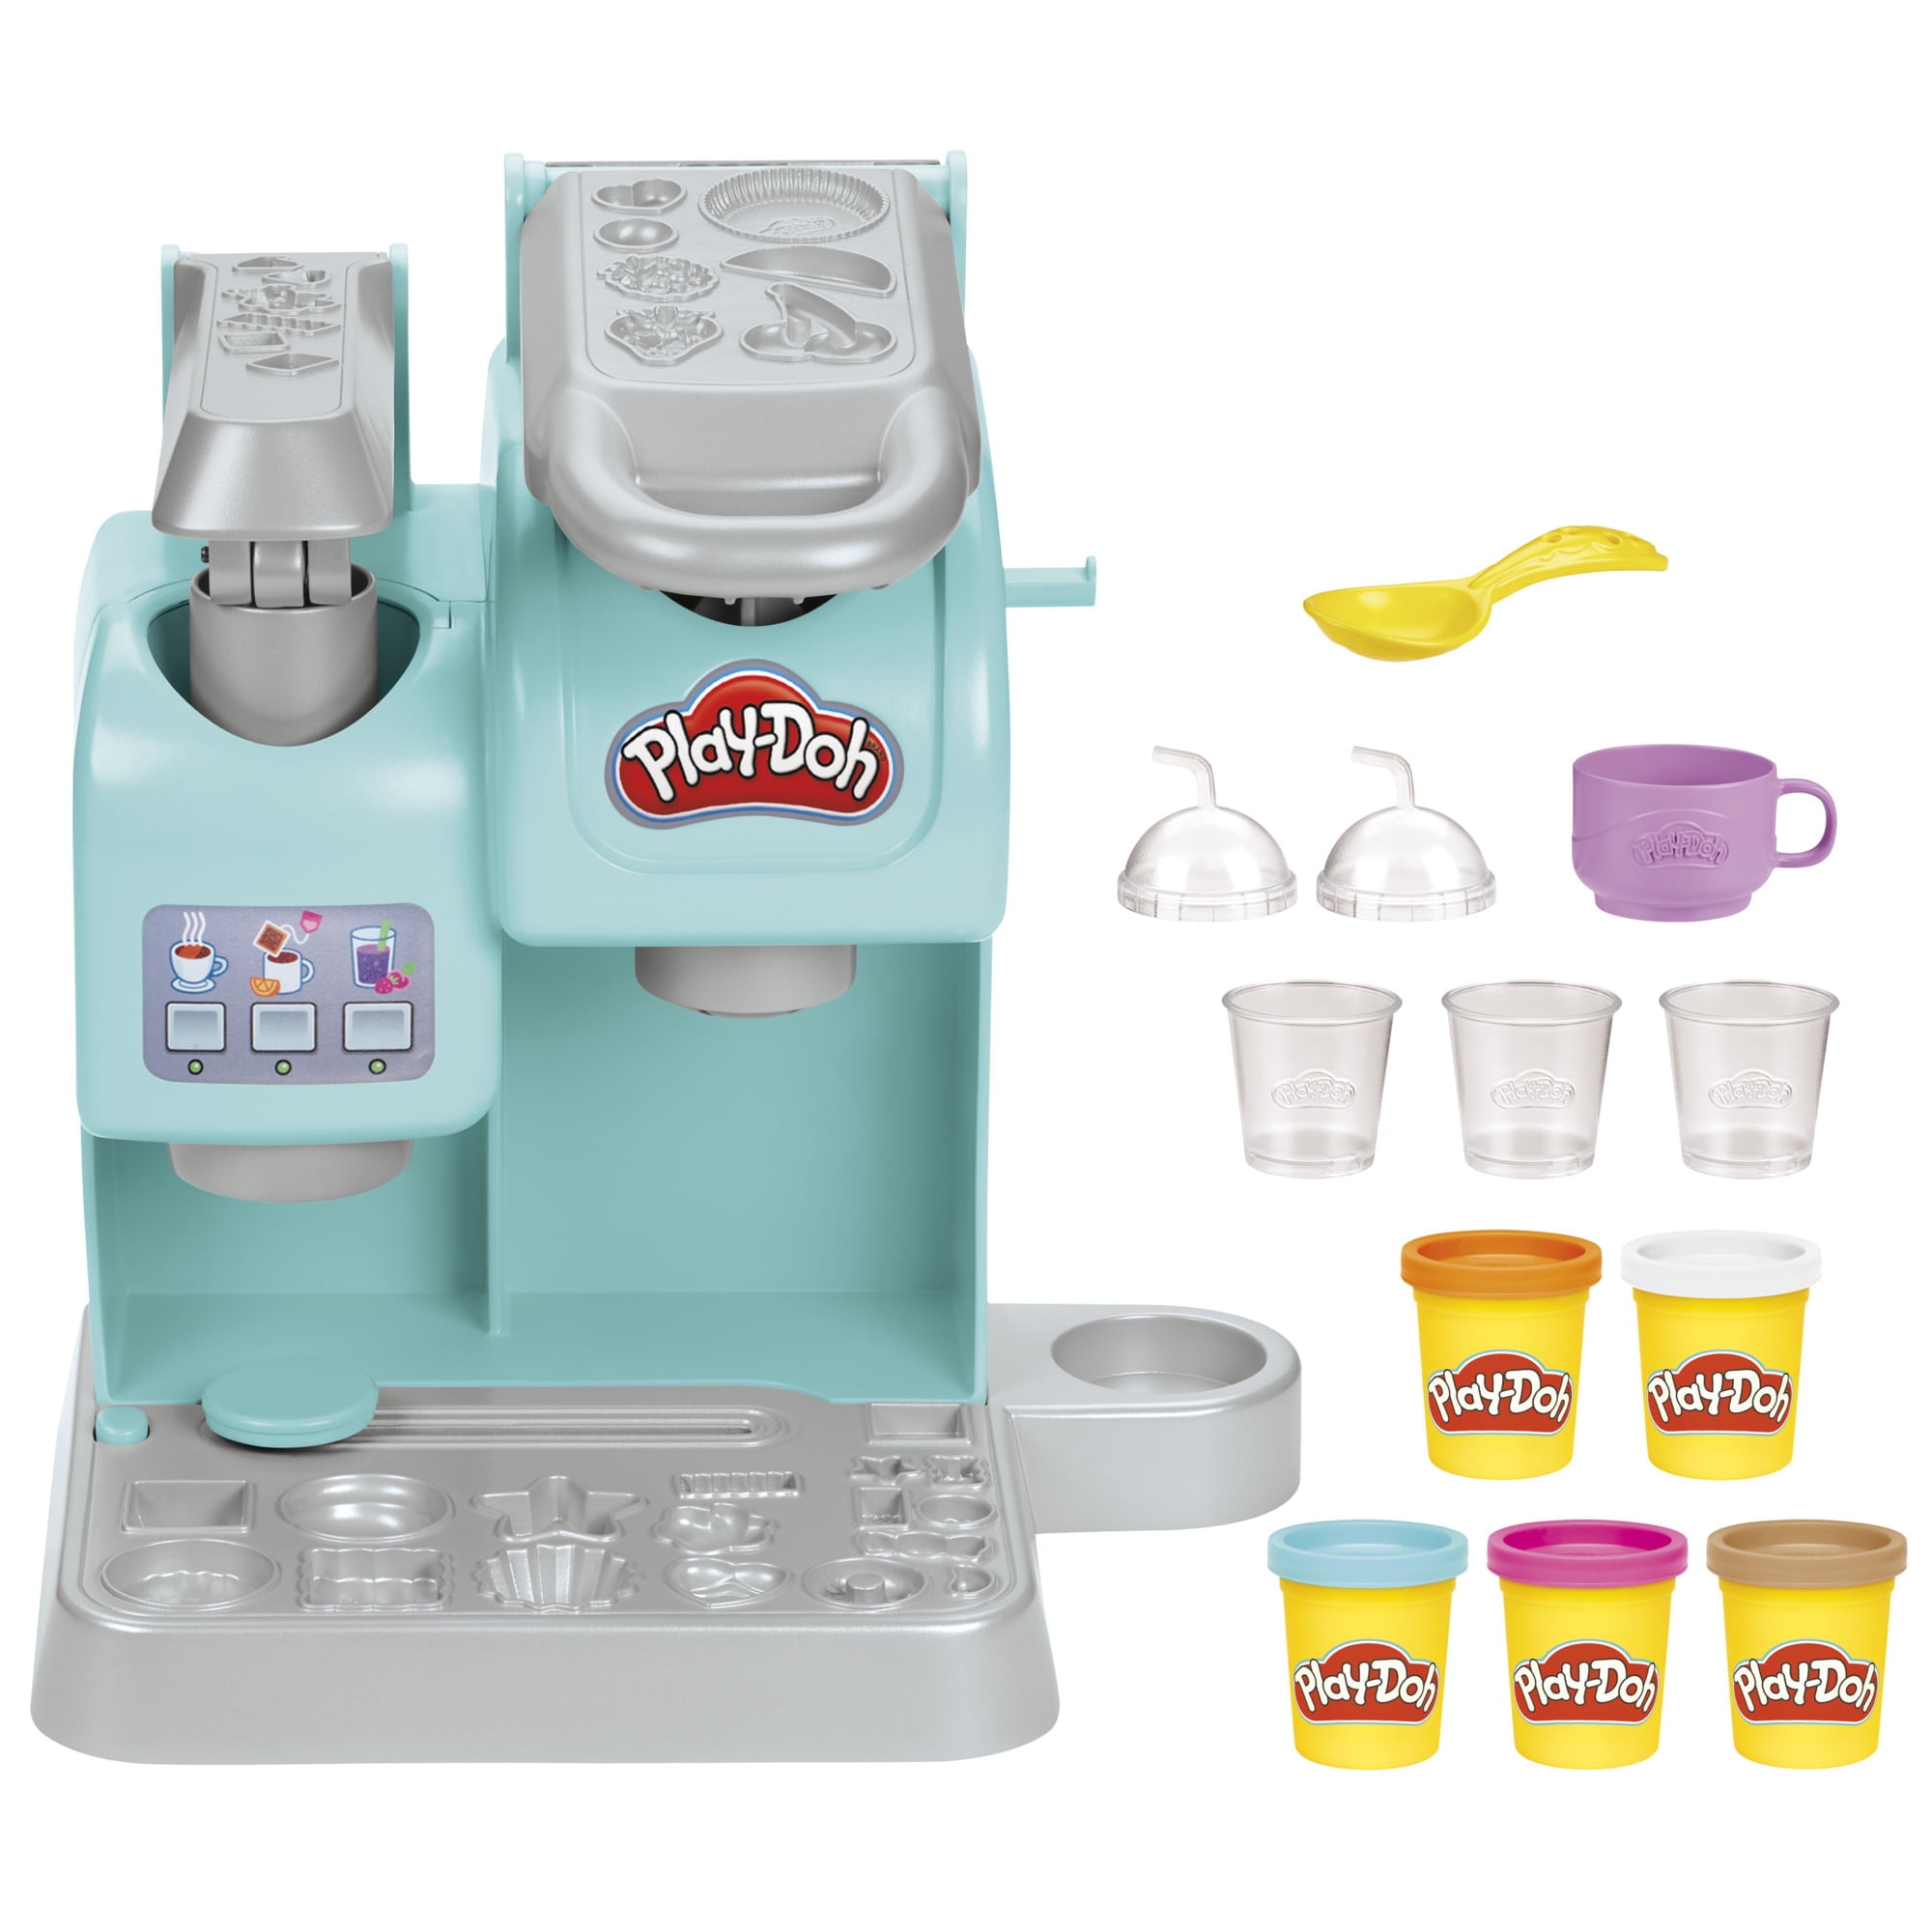 Play-Doh Kitchen Creations Colorful Cafe Kids Kitchen Play Set - 5 Colors